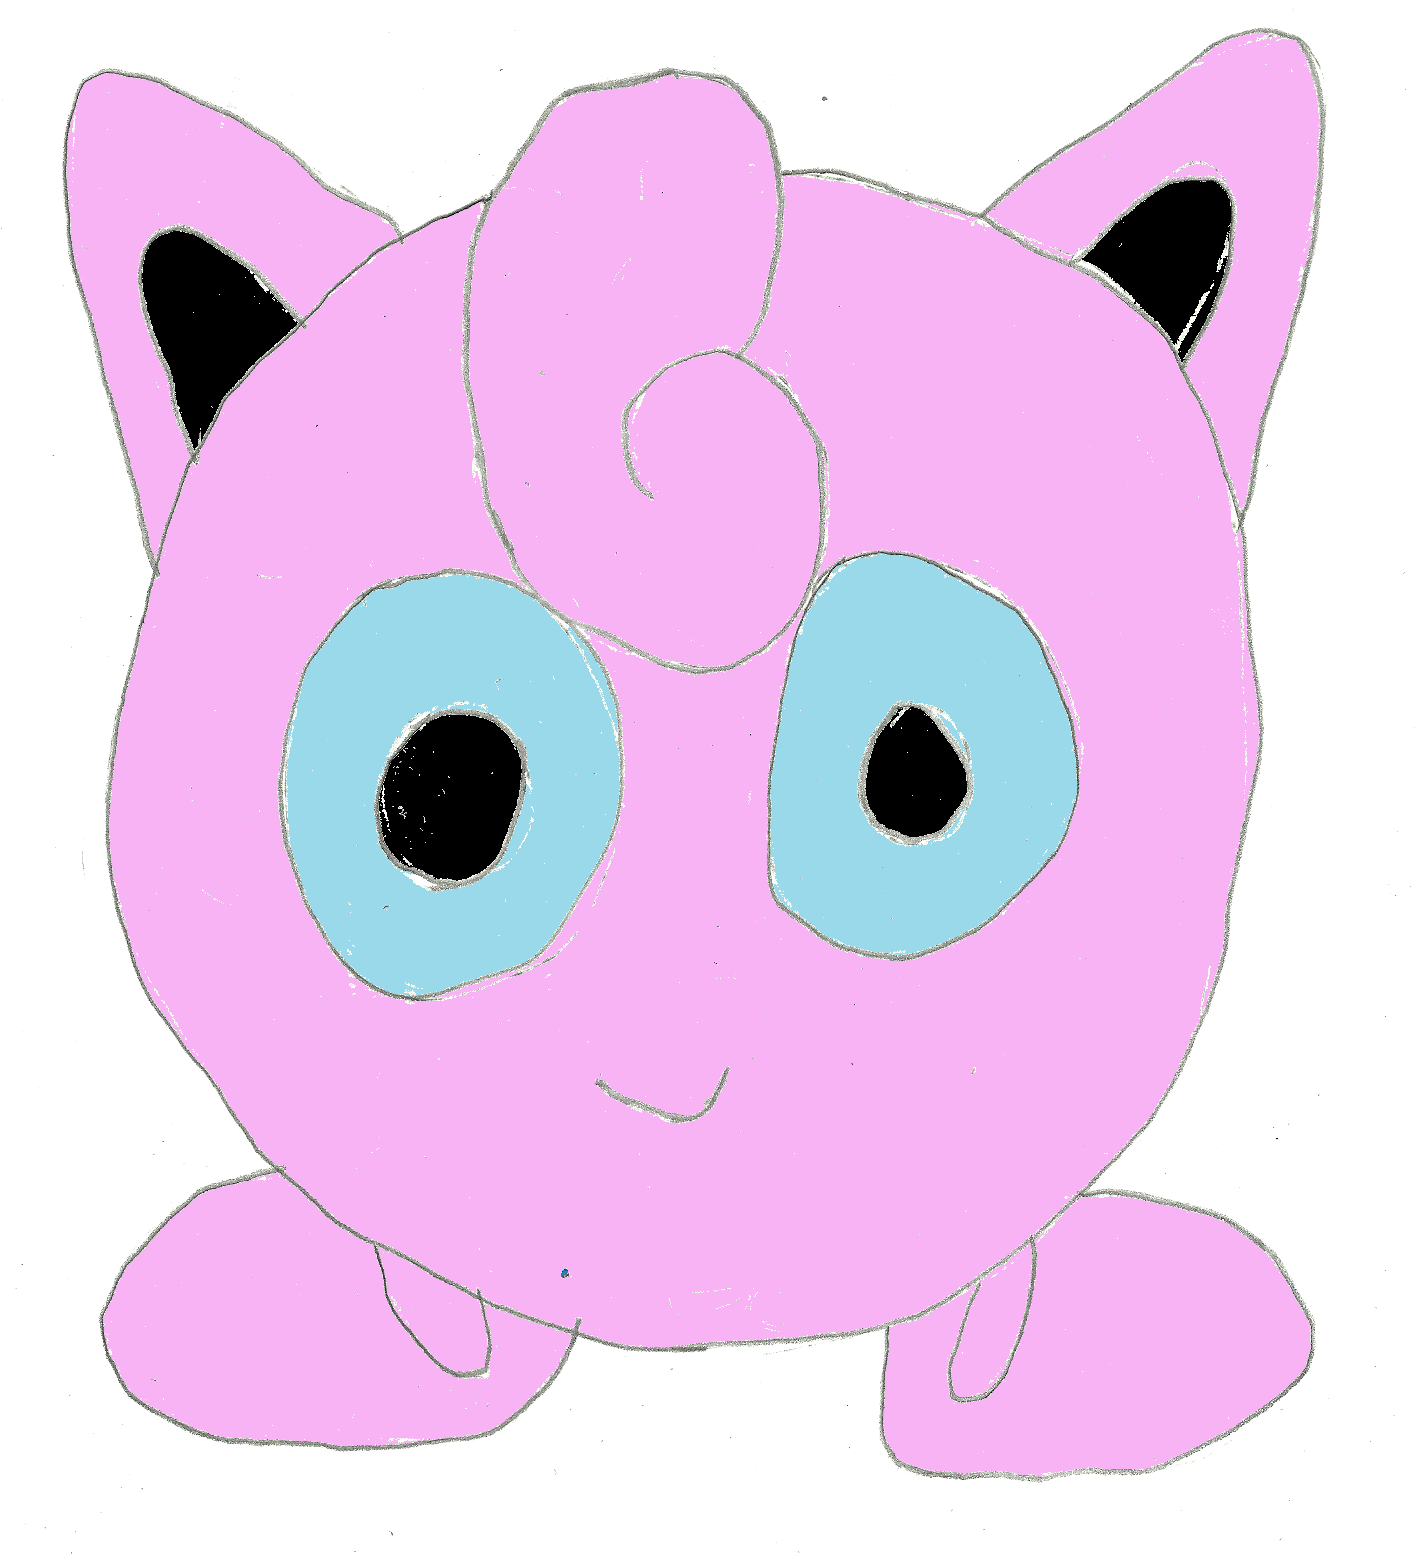 Jigglypuff Image Jiggly Puff HD Wallpaper And Background